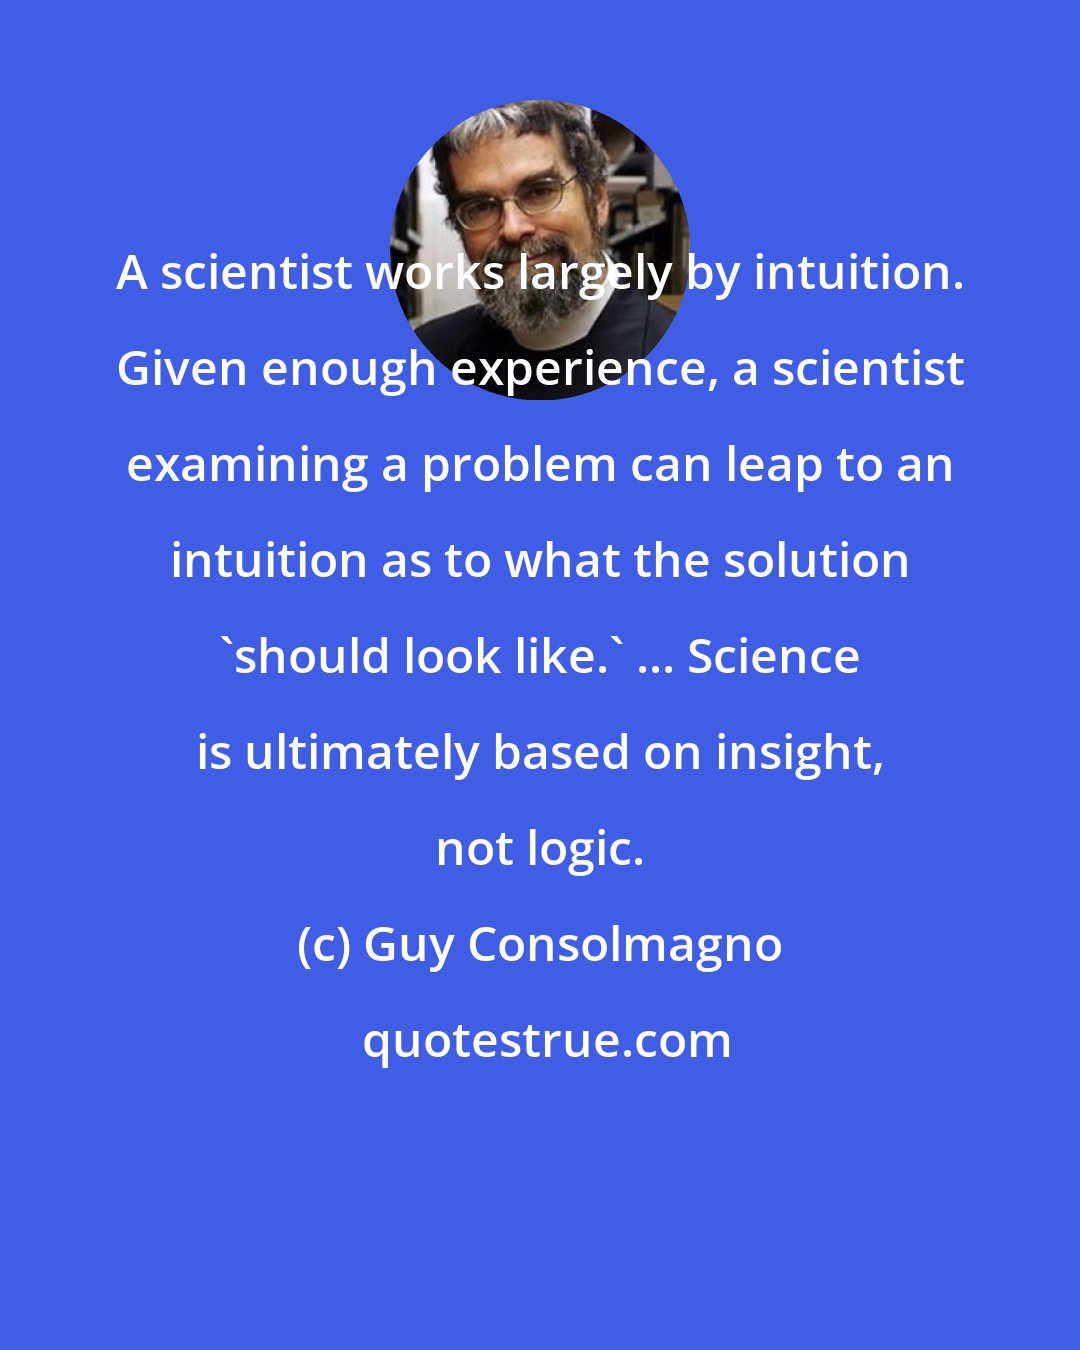 Guy Consolmagno: A scientist works largely by intuition. Given enough experience, a scientist examining a problem can leap to an intuition as to what the solution 'should look like.' ... Science is ultimately based on insight, not logic.